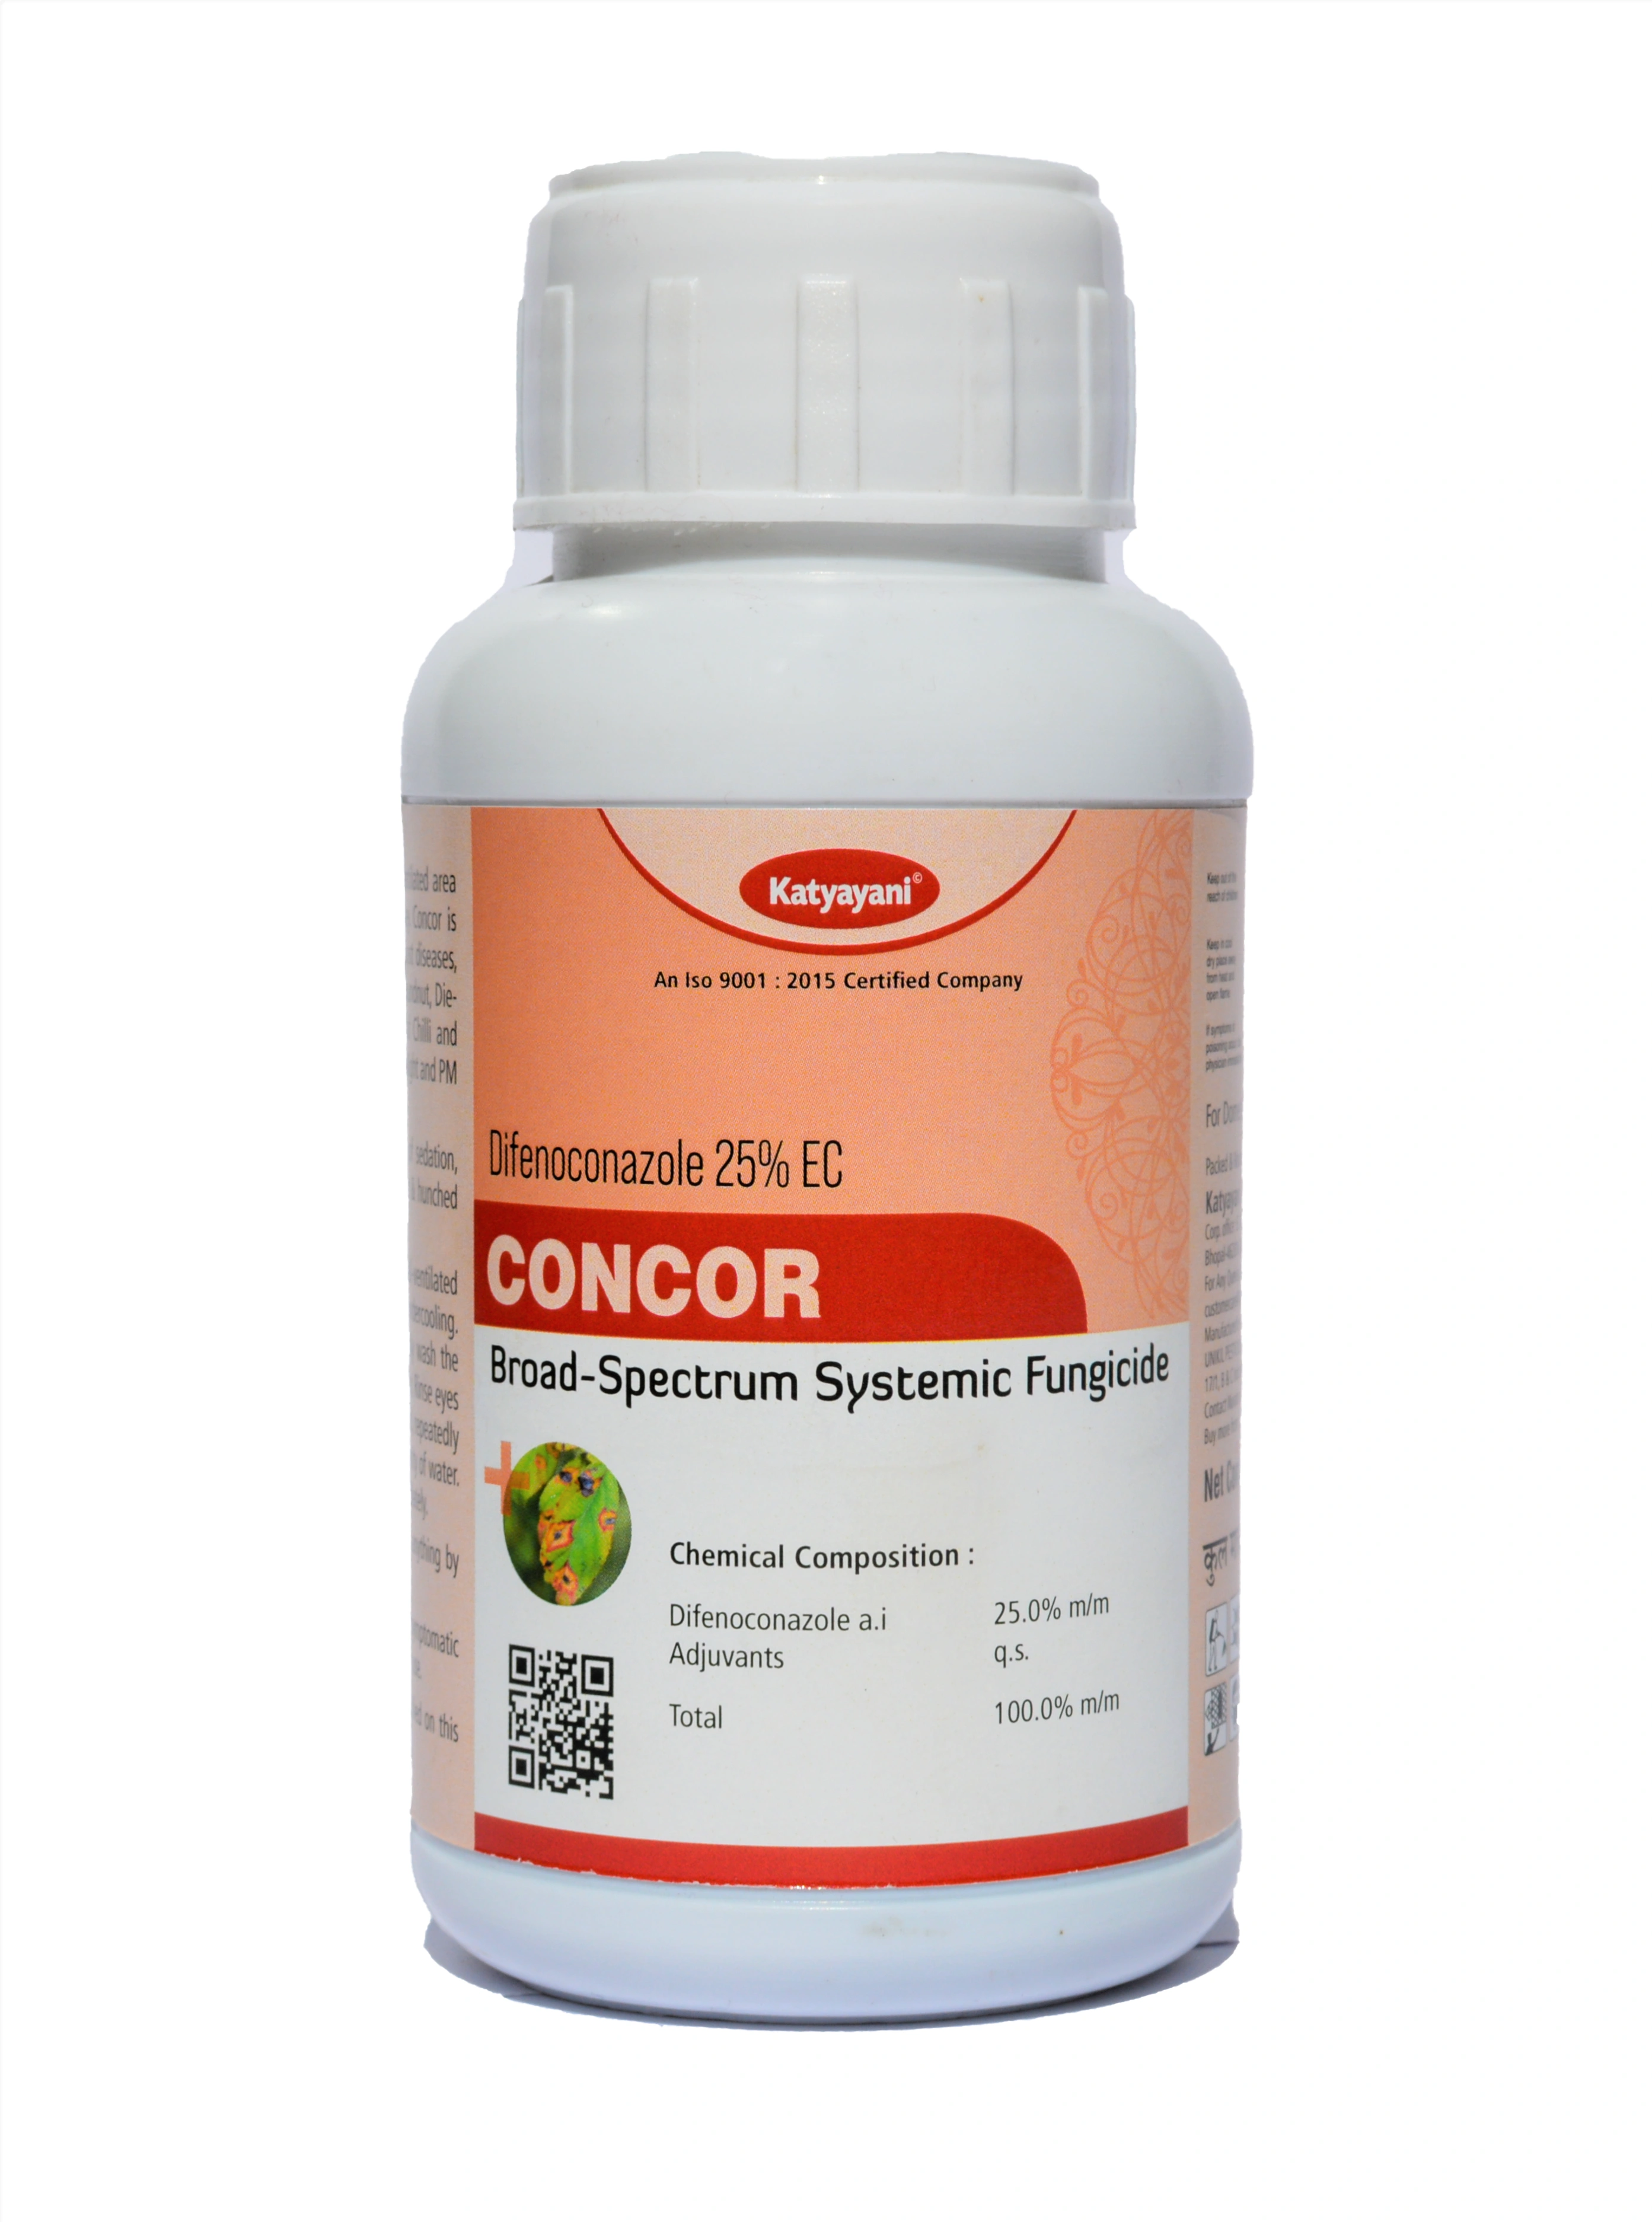 Katyayani Concor Difenoconazole 25% Ec Systemic Fungicide for all Plants and Home Garden Powerful Broad Spectrum Disease Control   rusts in fruit trees  pulses ornamentals and vegetables-11378456